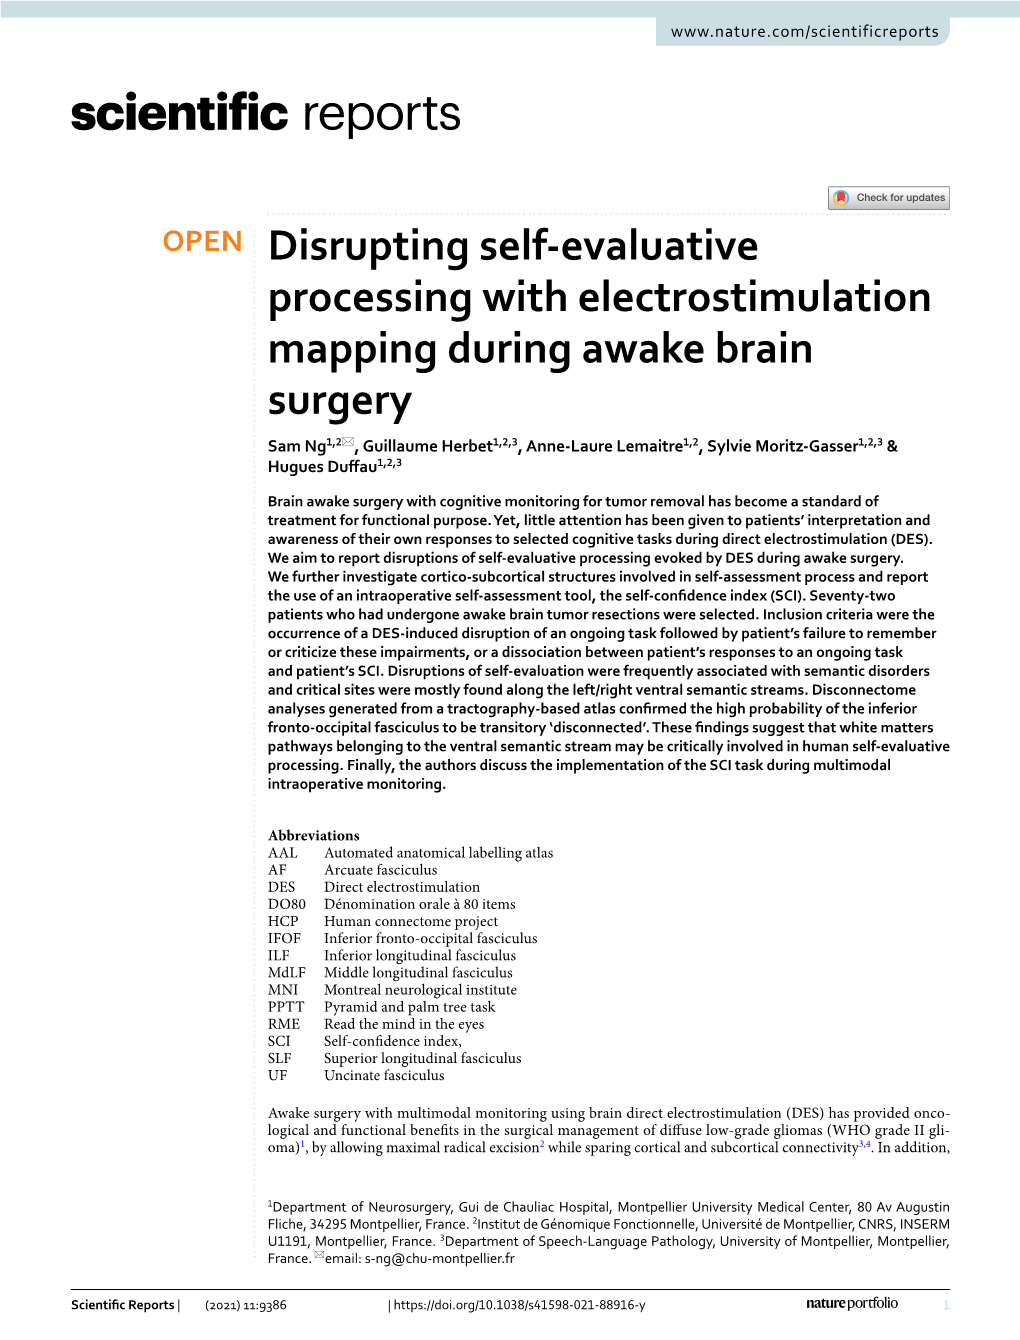 Disrupting Self-Evaluative Processing with Electrostimulation Mapping